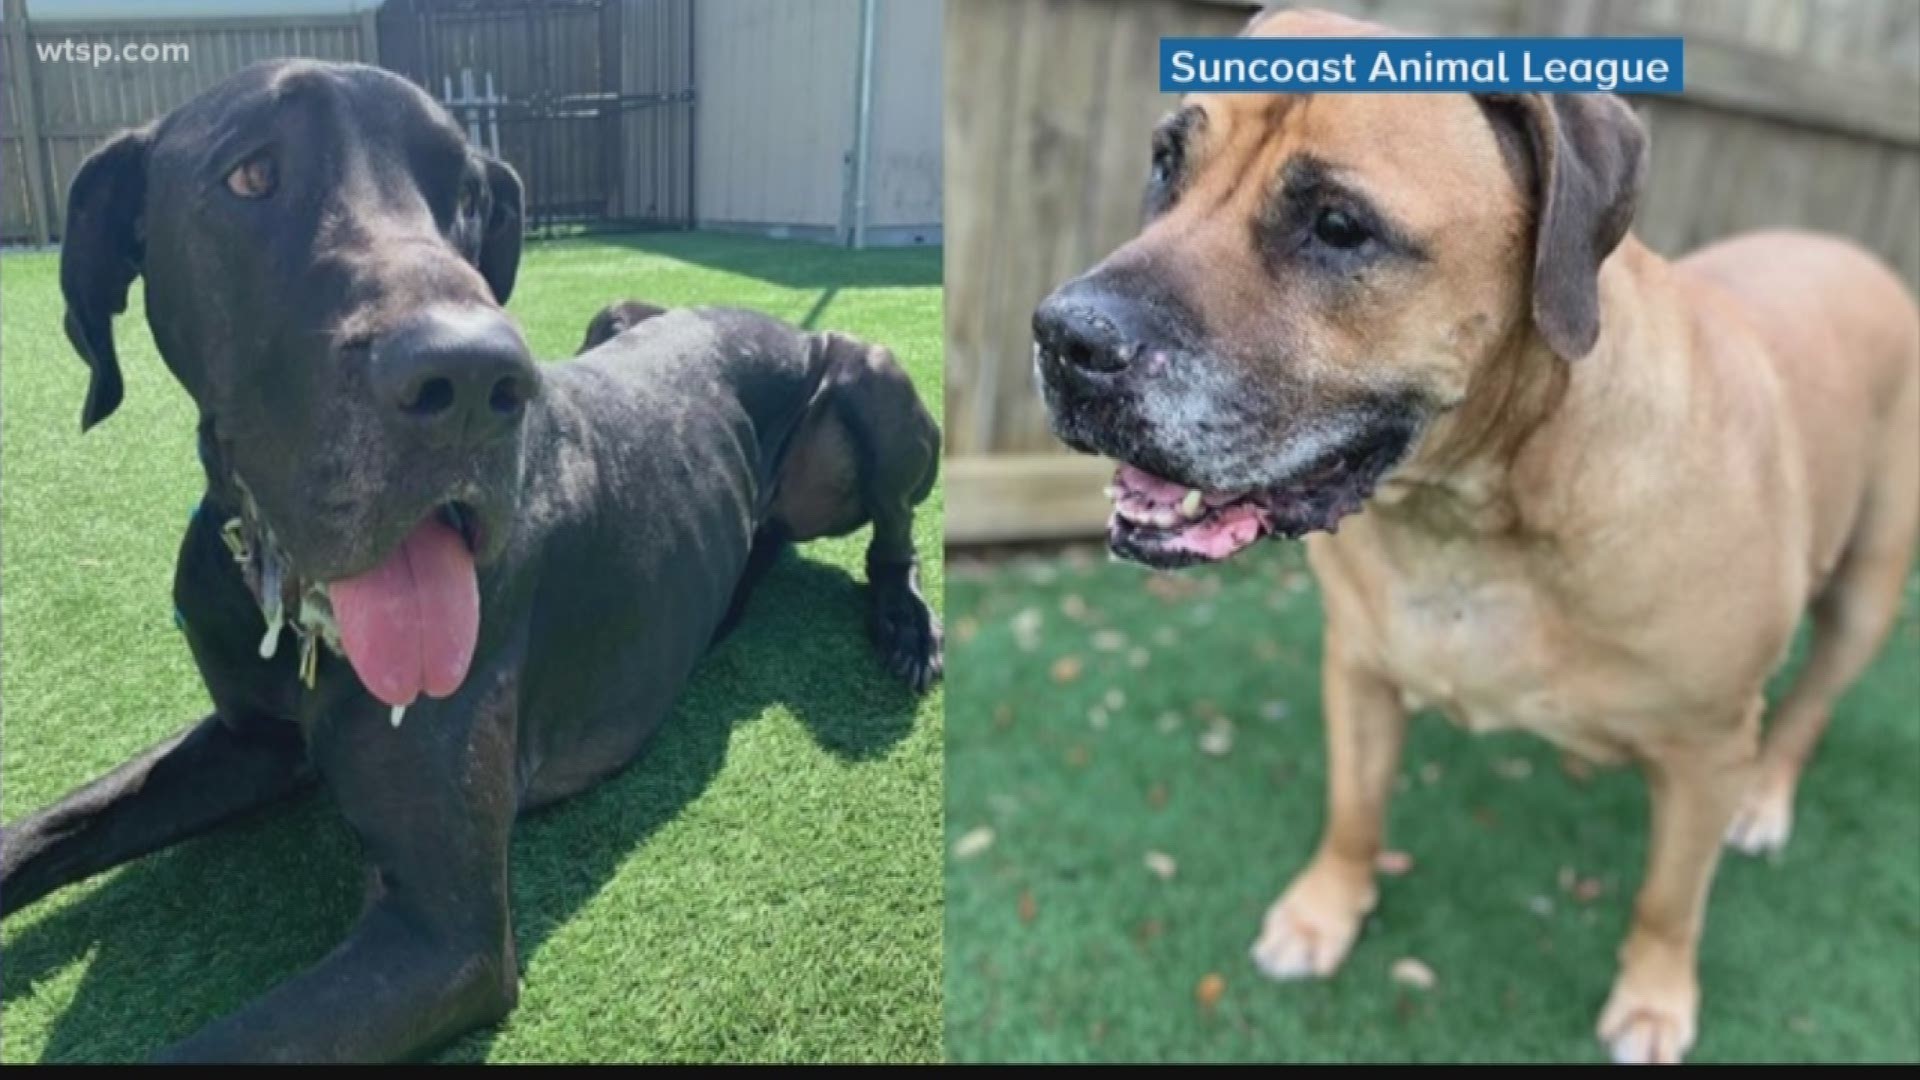 The Suncoast Animal League tells us about Savvy and Pirate, who were found with their Pasco County owner, who had been dead for days.